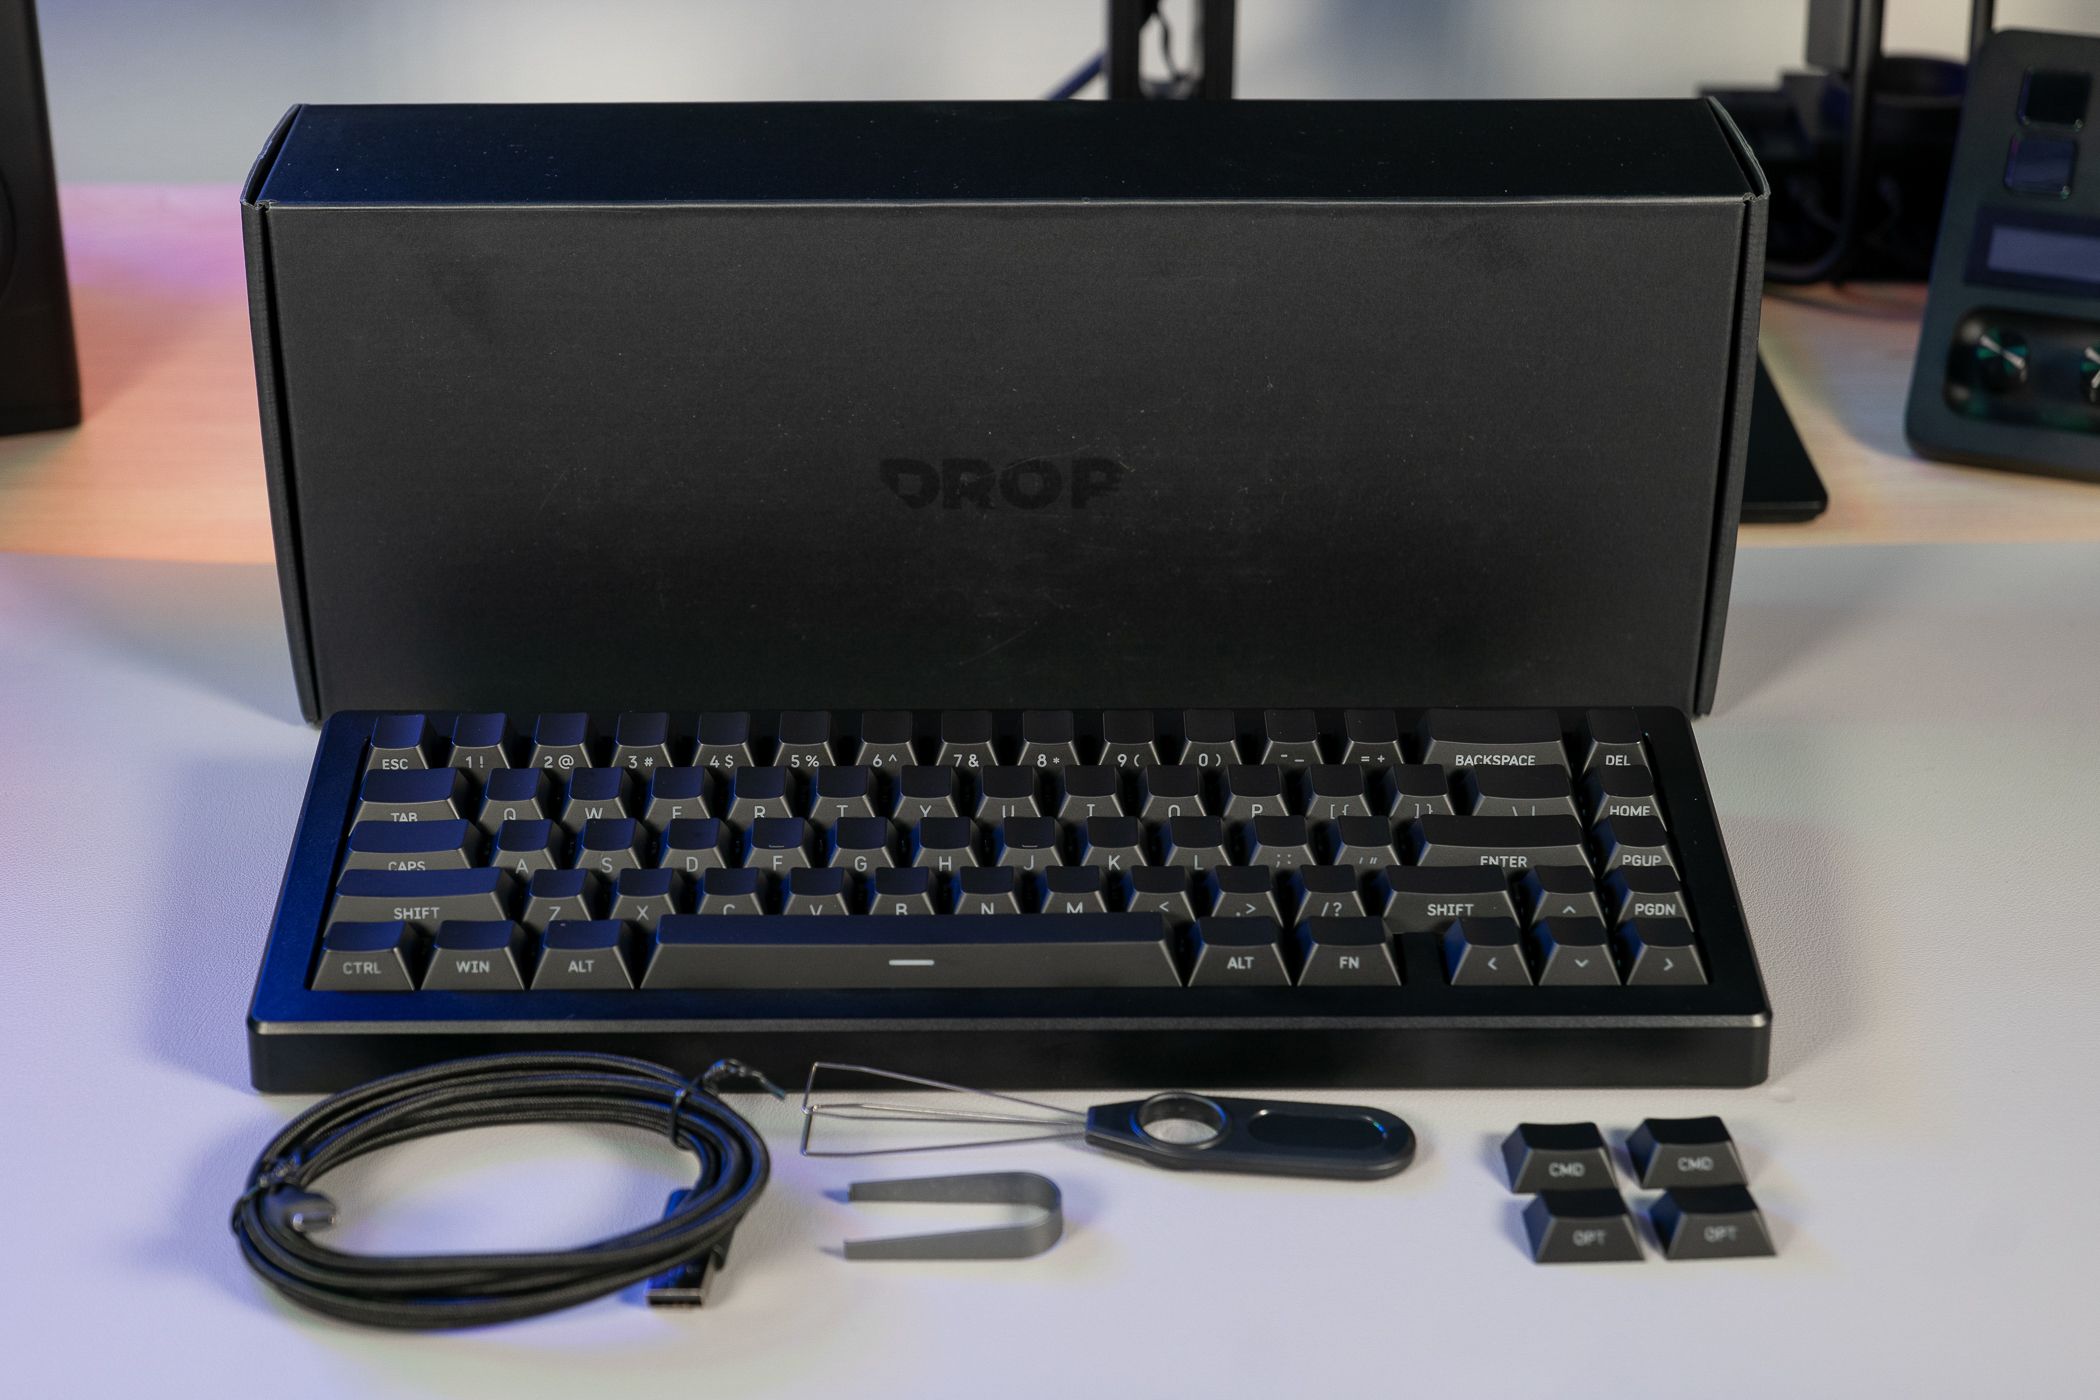 drop-cstm65-keyboard-and-included-accessories-in-front-of-boxjpg_53519702105_o